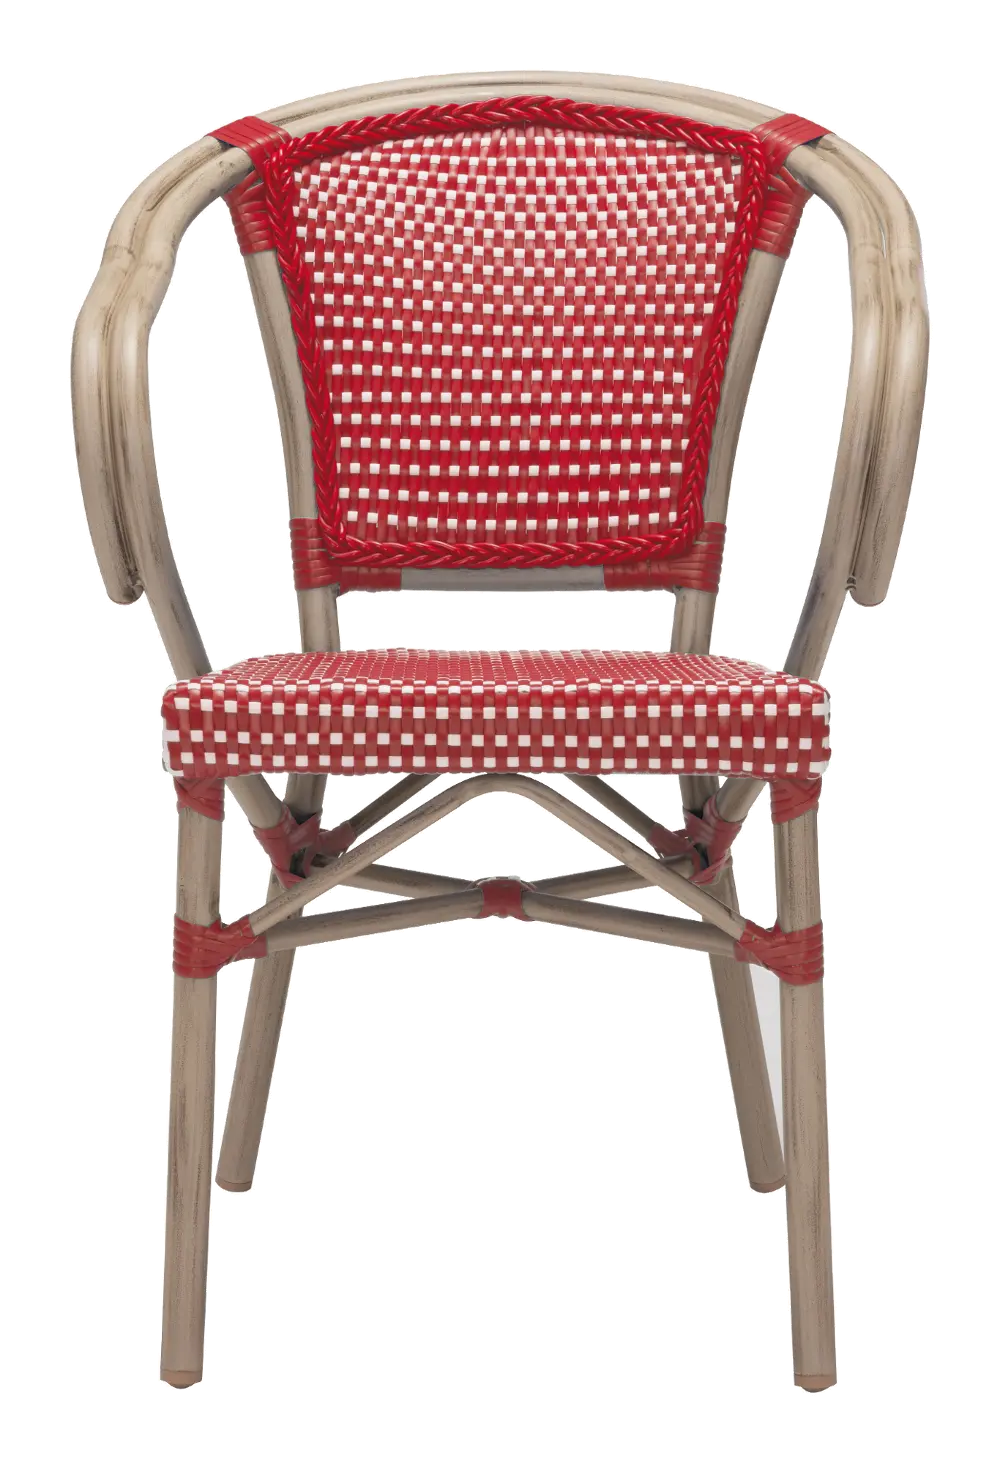 Set of 2 Red and White Outdoor Patio Dining Chairs - Paris-1